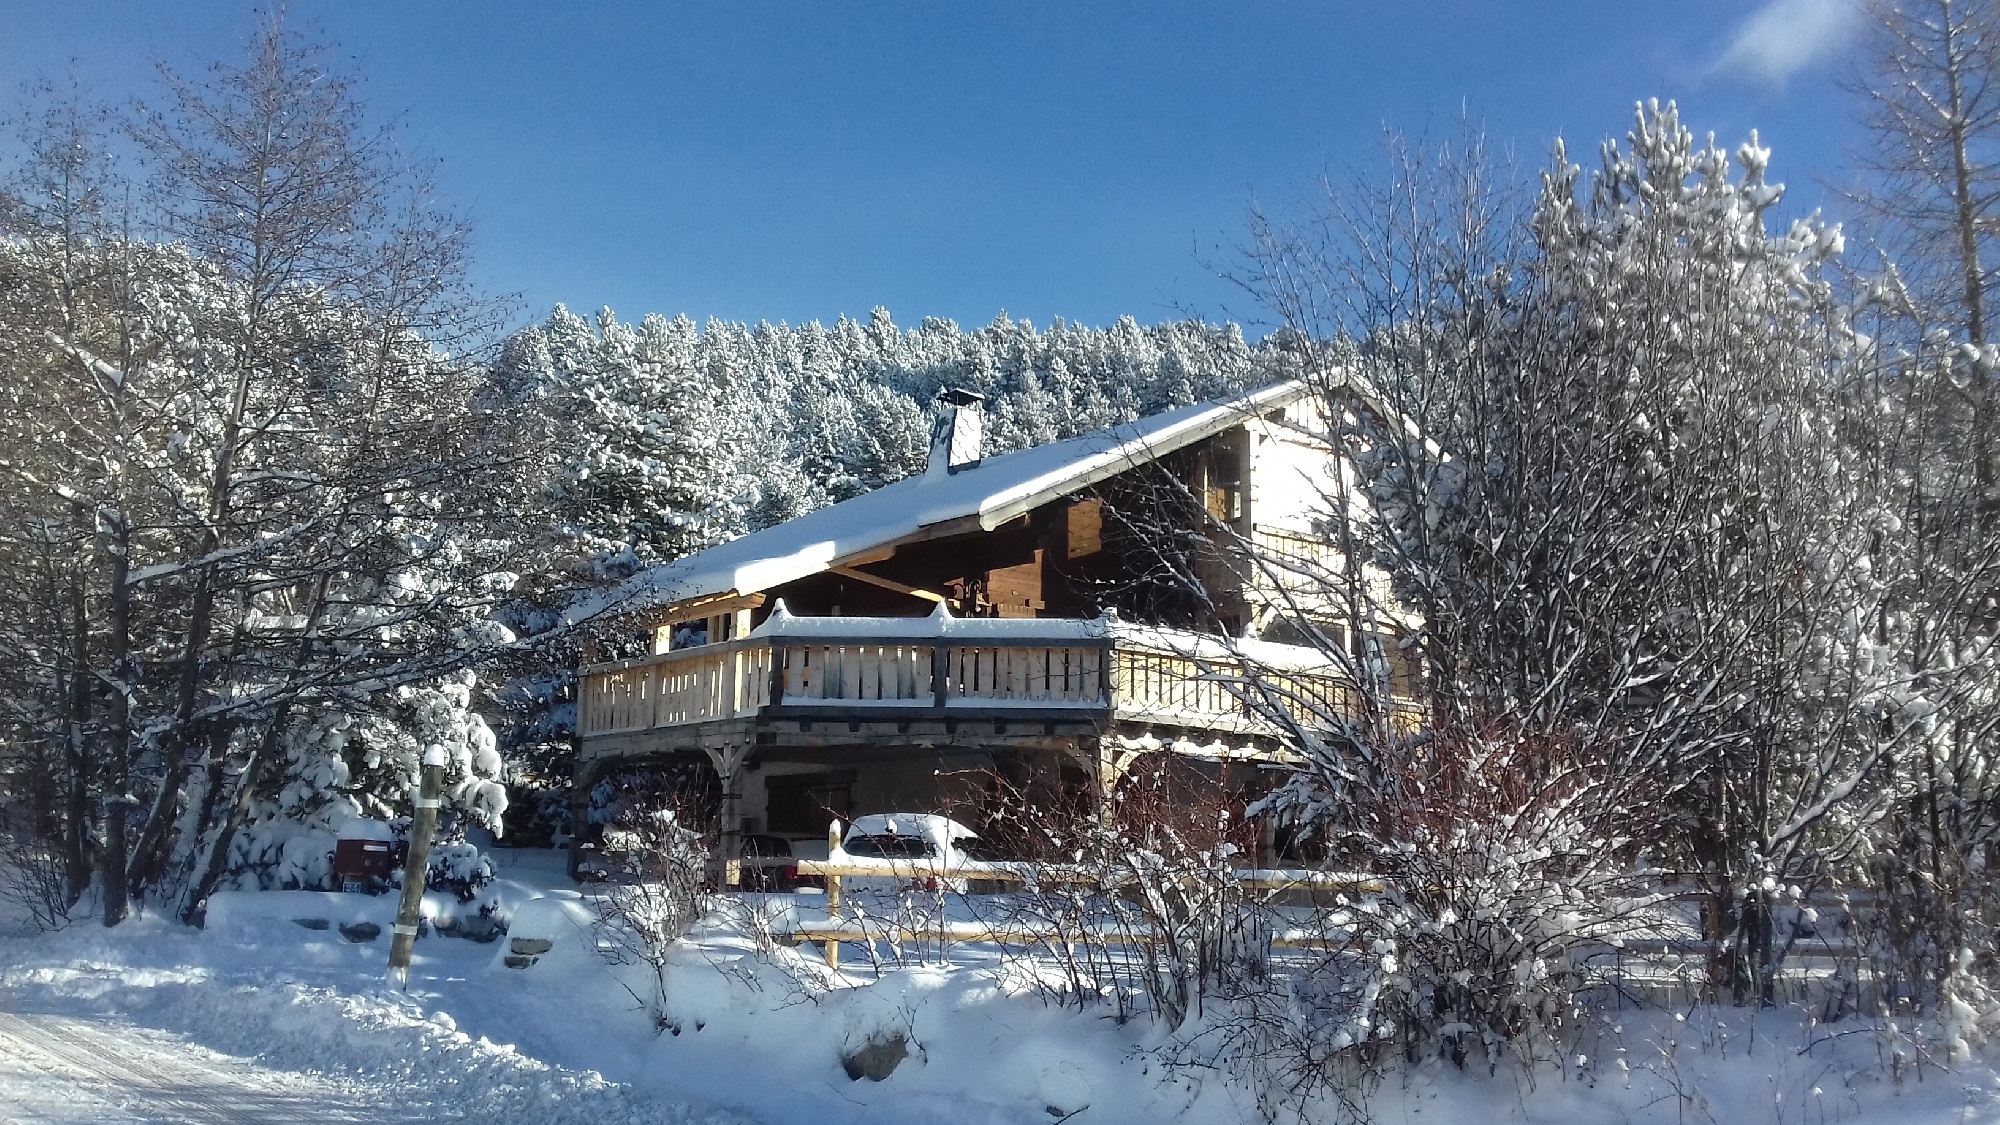  Chalets for 4, 5 or 6 persons : 1 Chalet in st Pierre, 1 Chalet in Bolquère, 1 Gite in Targasonne